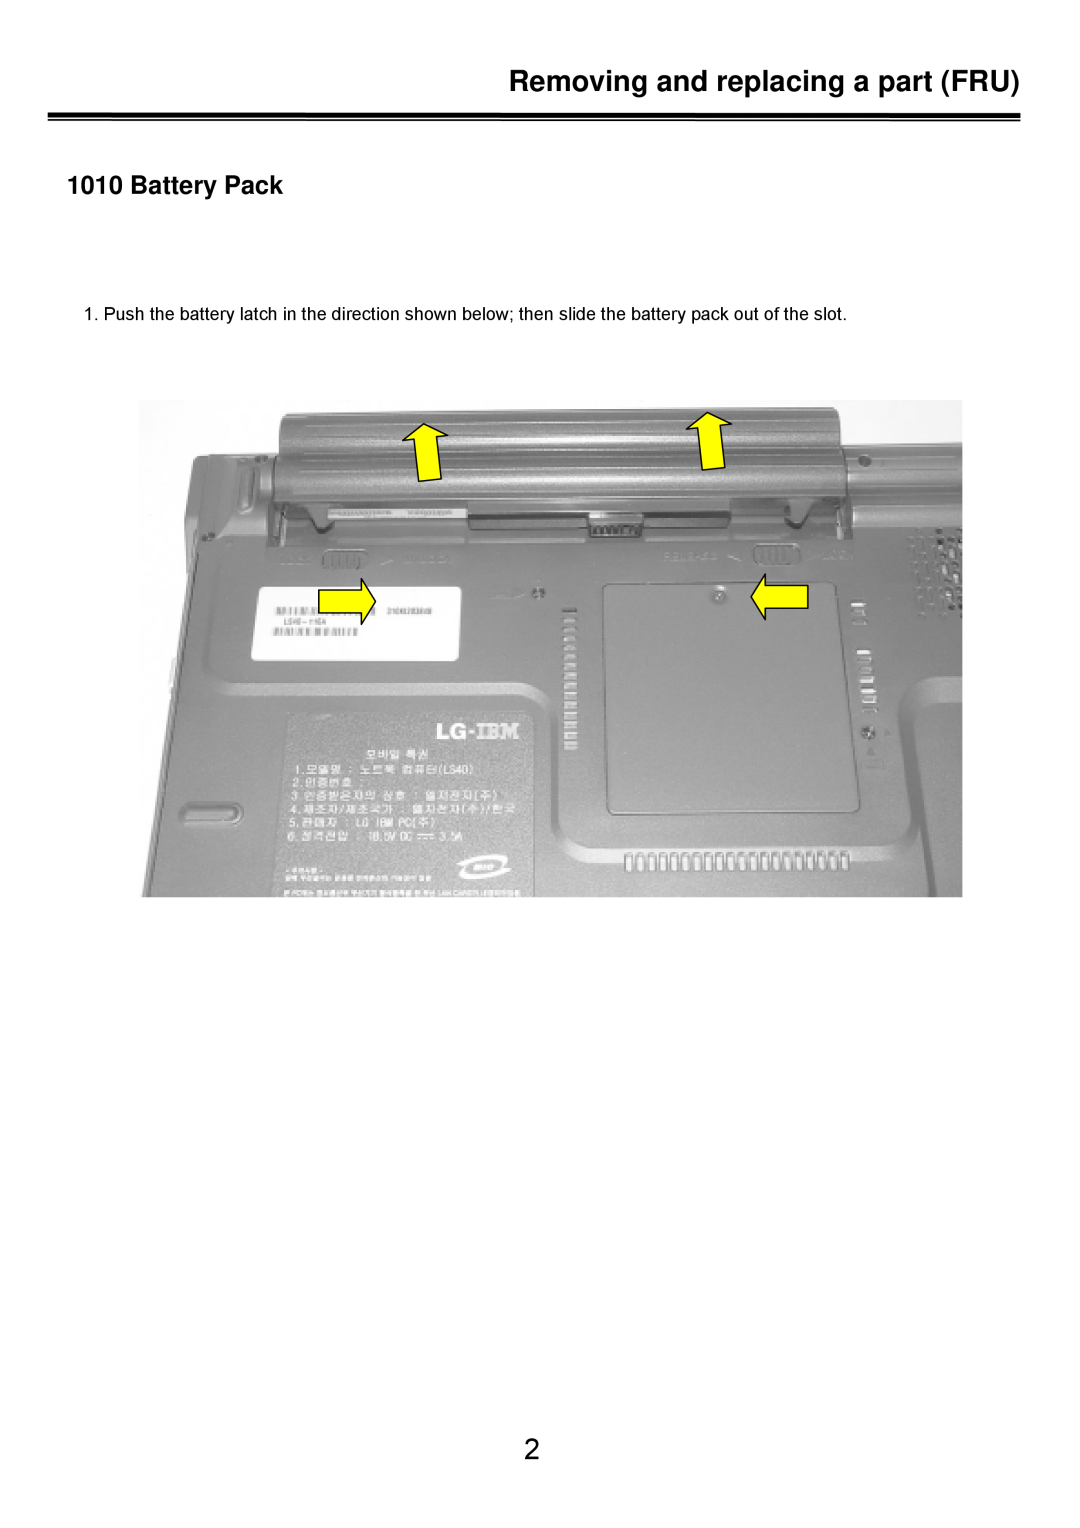 LG Electronics LS50 service manual Removing and replacing a part FRU, Battery Pack 